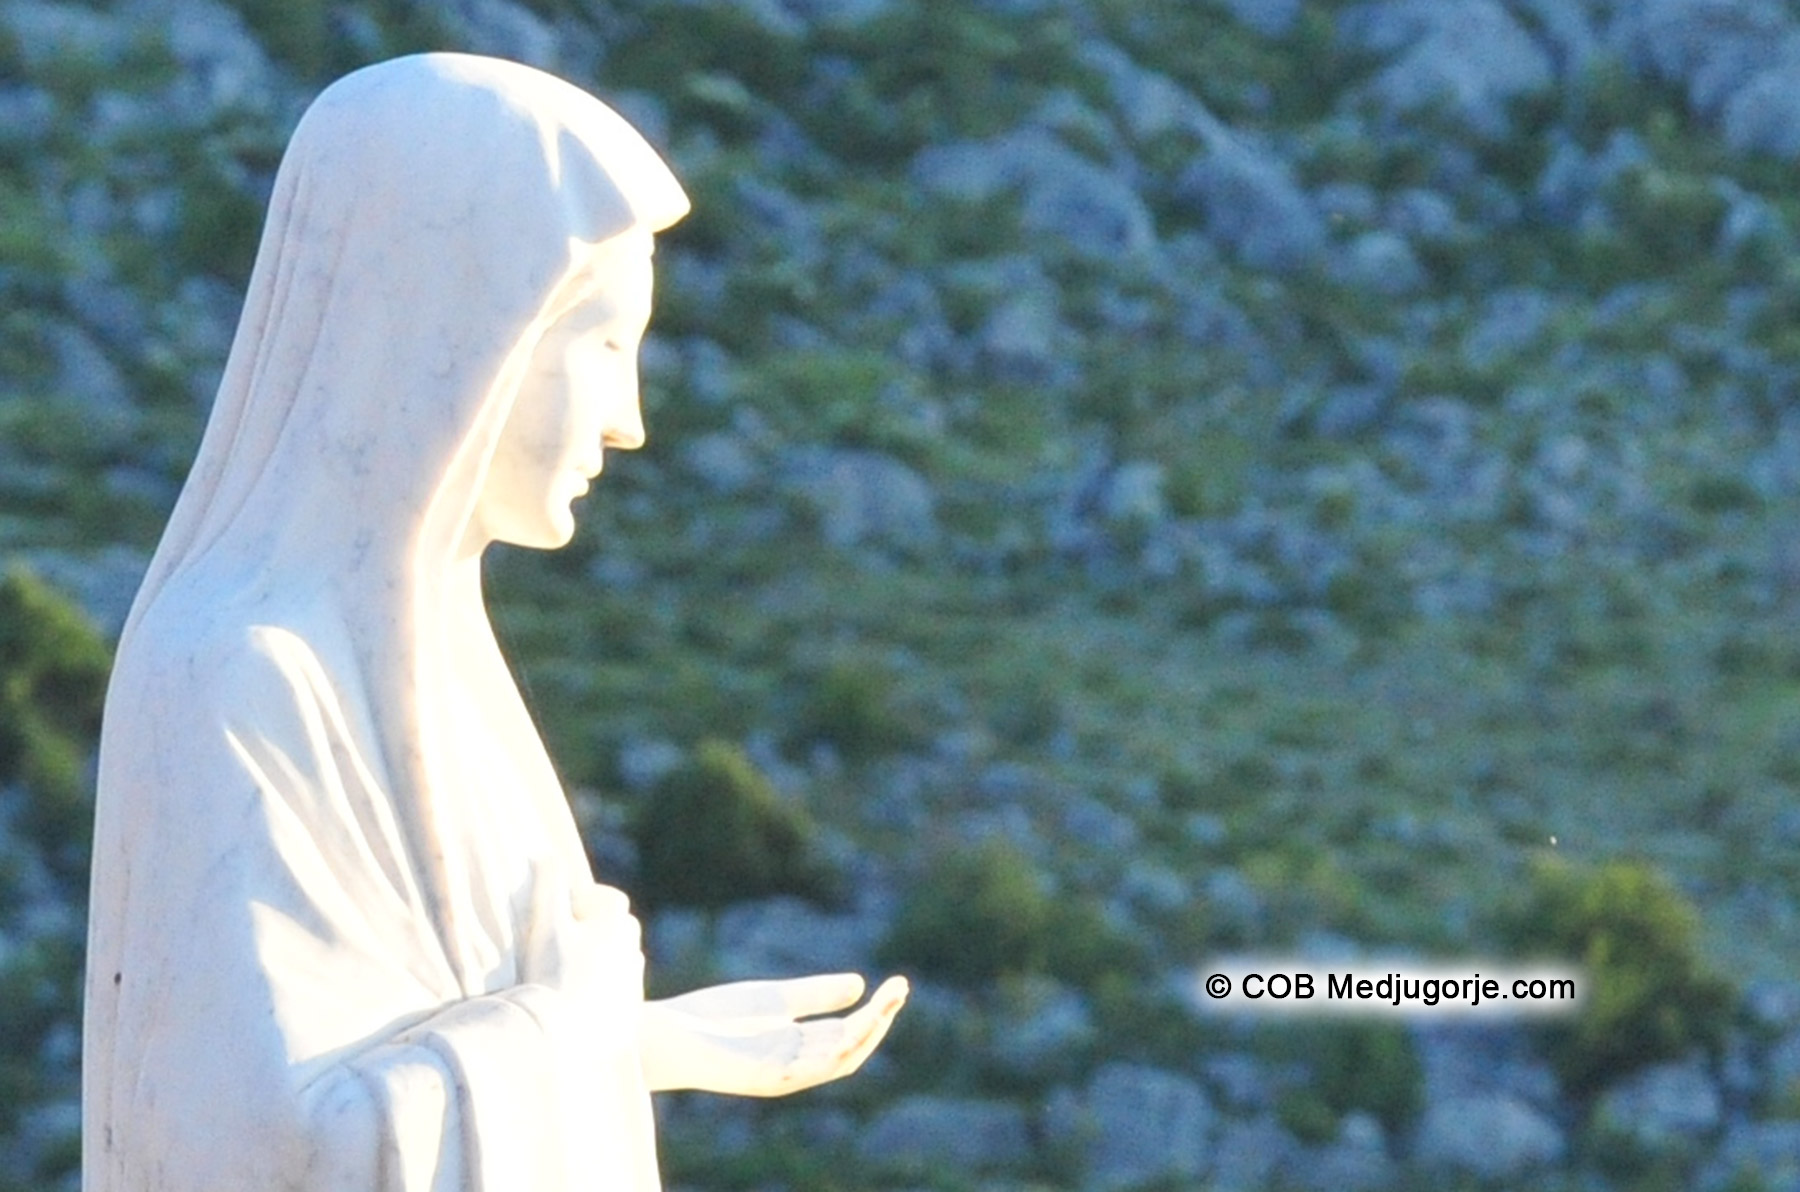 The Statue of Our Lady on Apparition Mountain